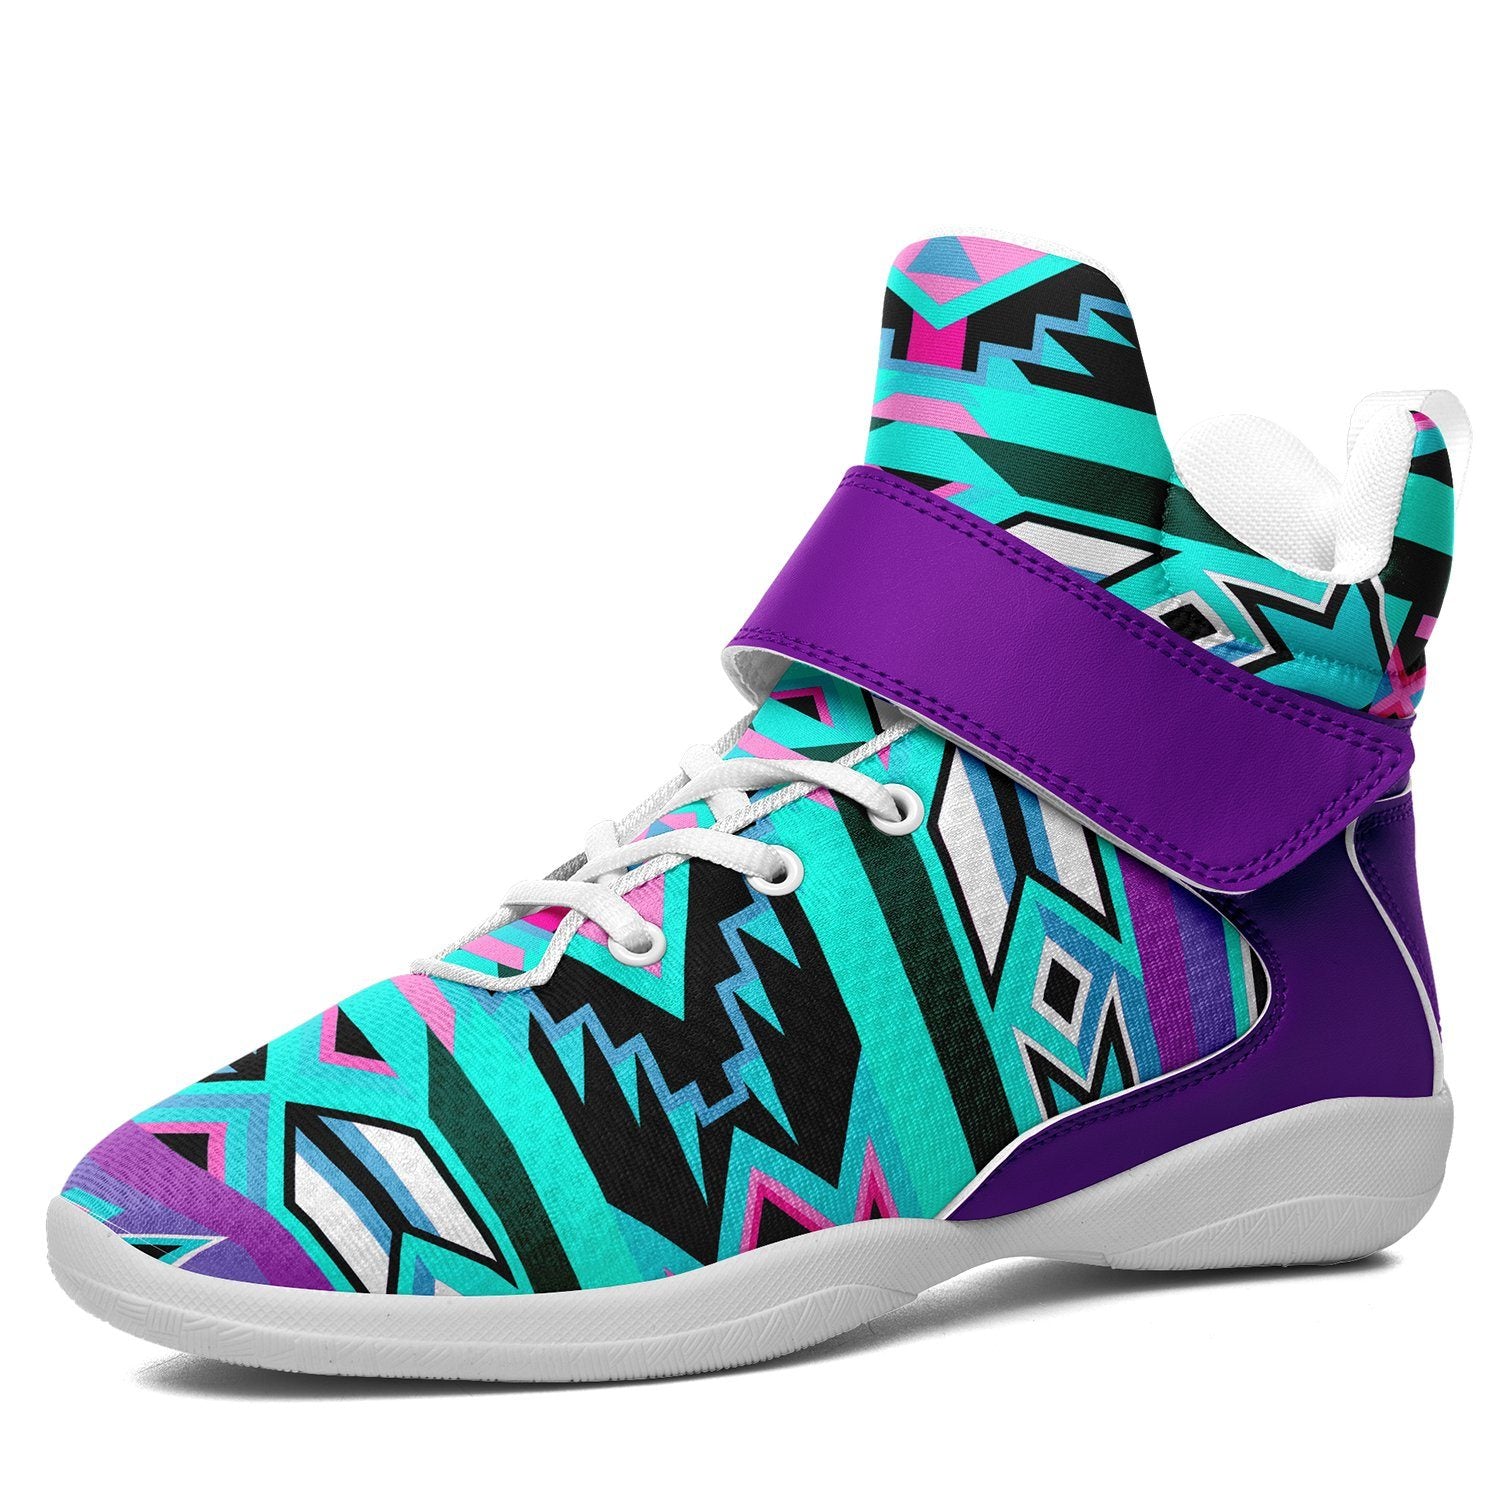 Northeast Journey Ipottaa Basketball / Sport High Top Shoes 49 Dzine US Women 4.5 / US Youth 3.5 / EUR 35 White Sole with Indigo Strap 